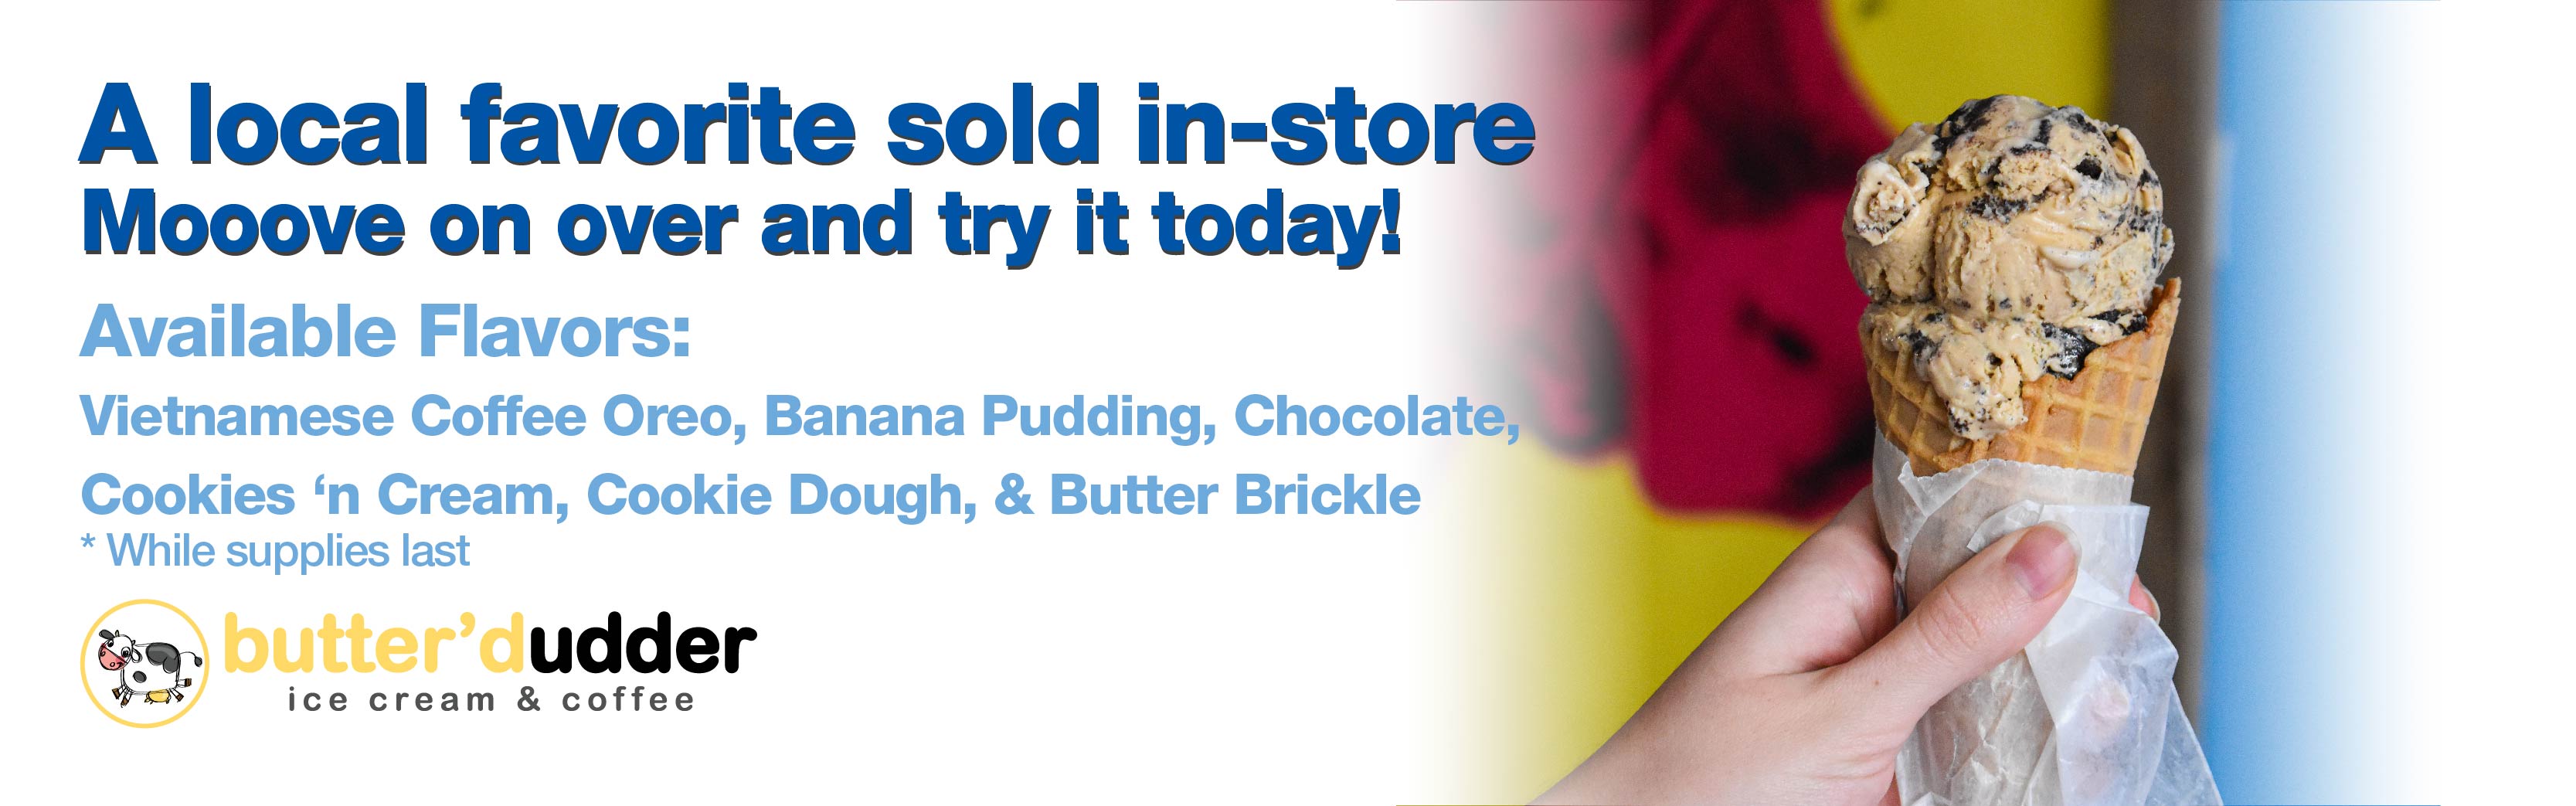 Butter'd Udder ice cream is a local favorite sold in the UWG Bookstore.